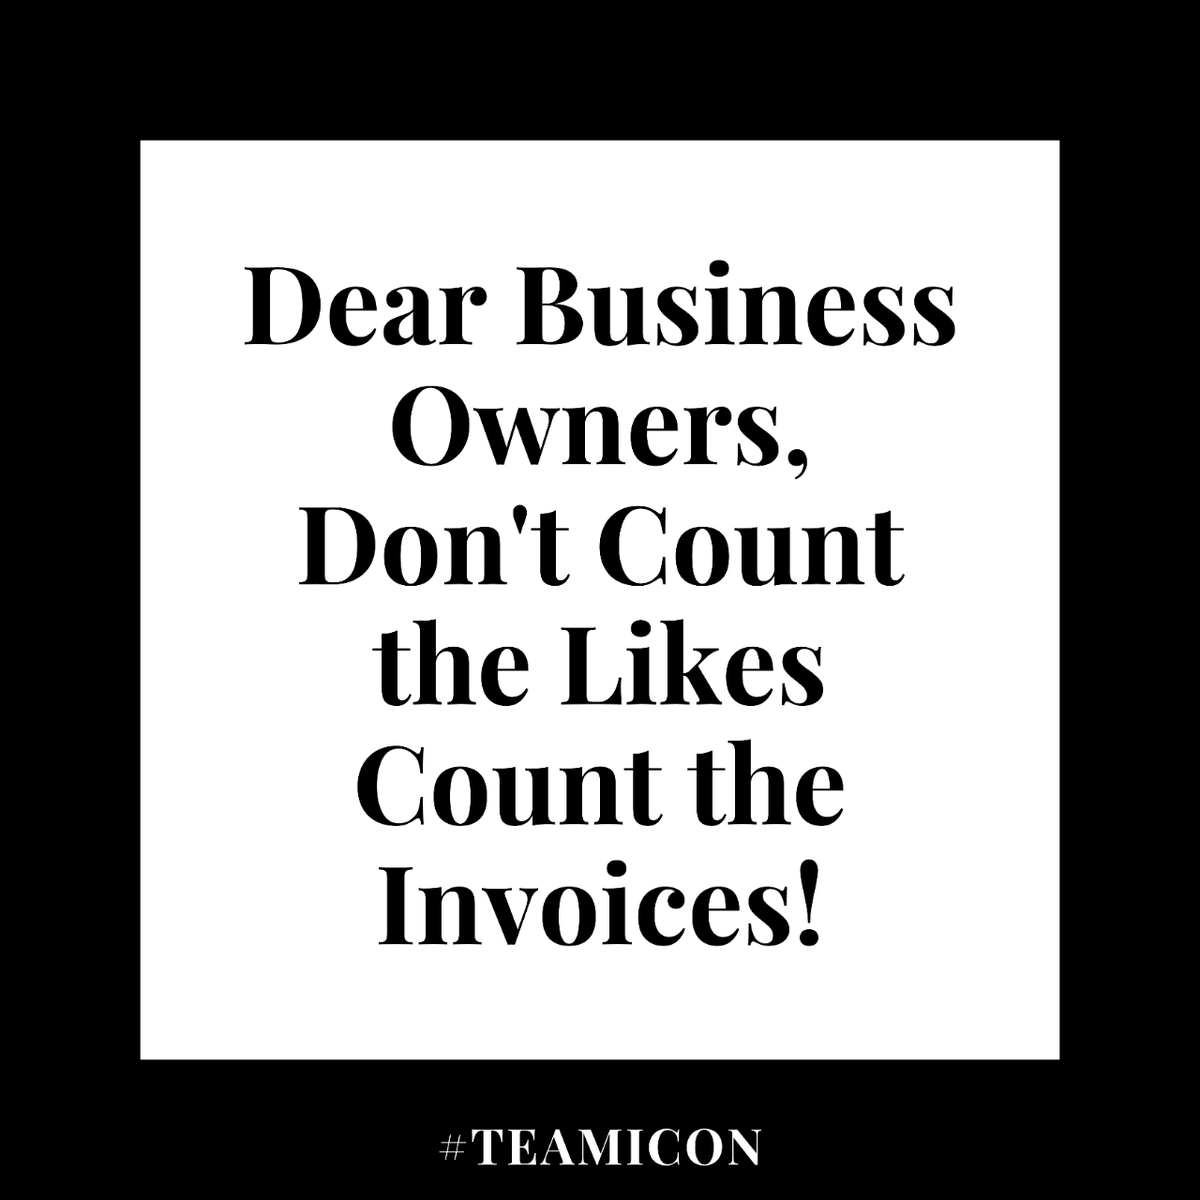 The metric you're supposed to care more about is - the invoices!

#teamicon #debt #debtcollection #localbusinesscanada #vancouverbusiness